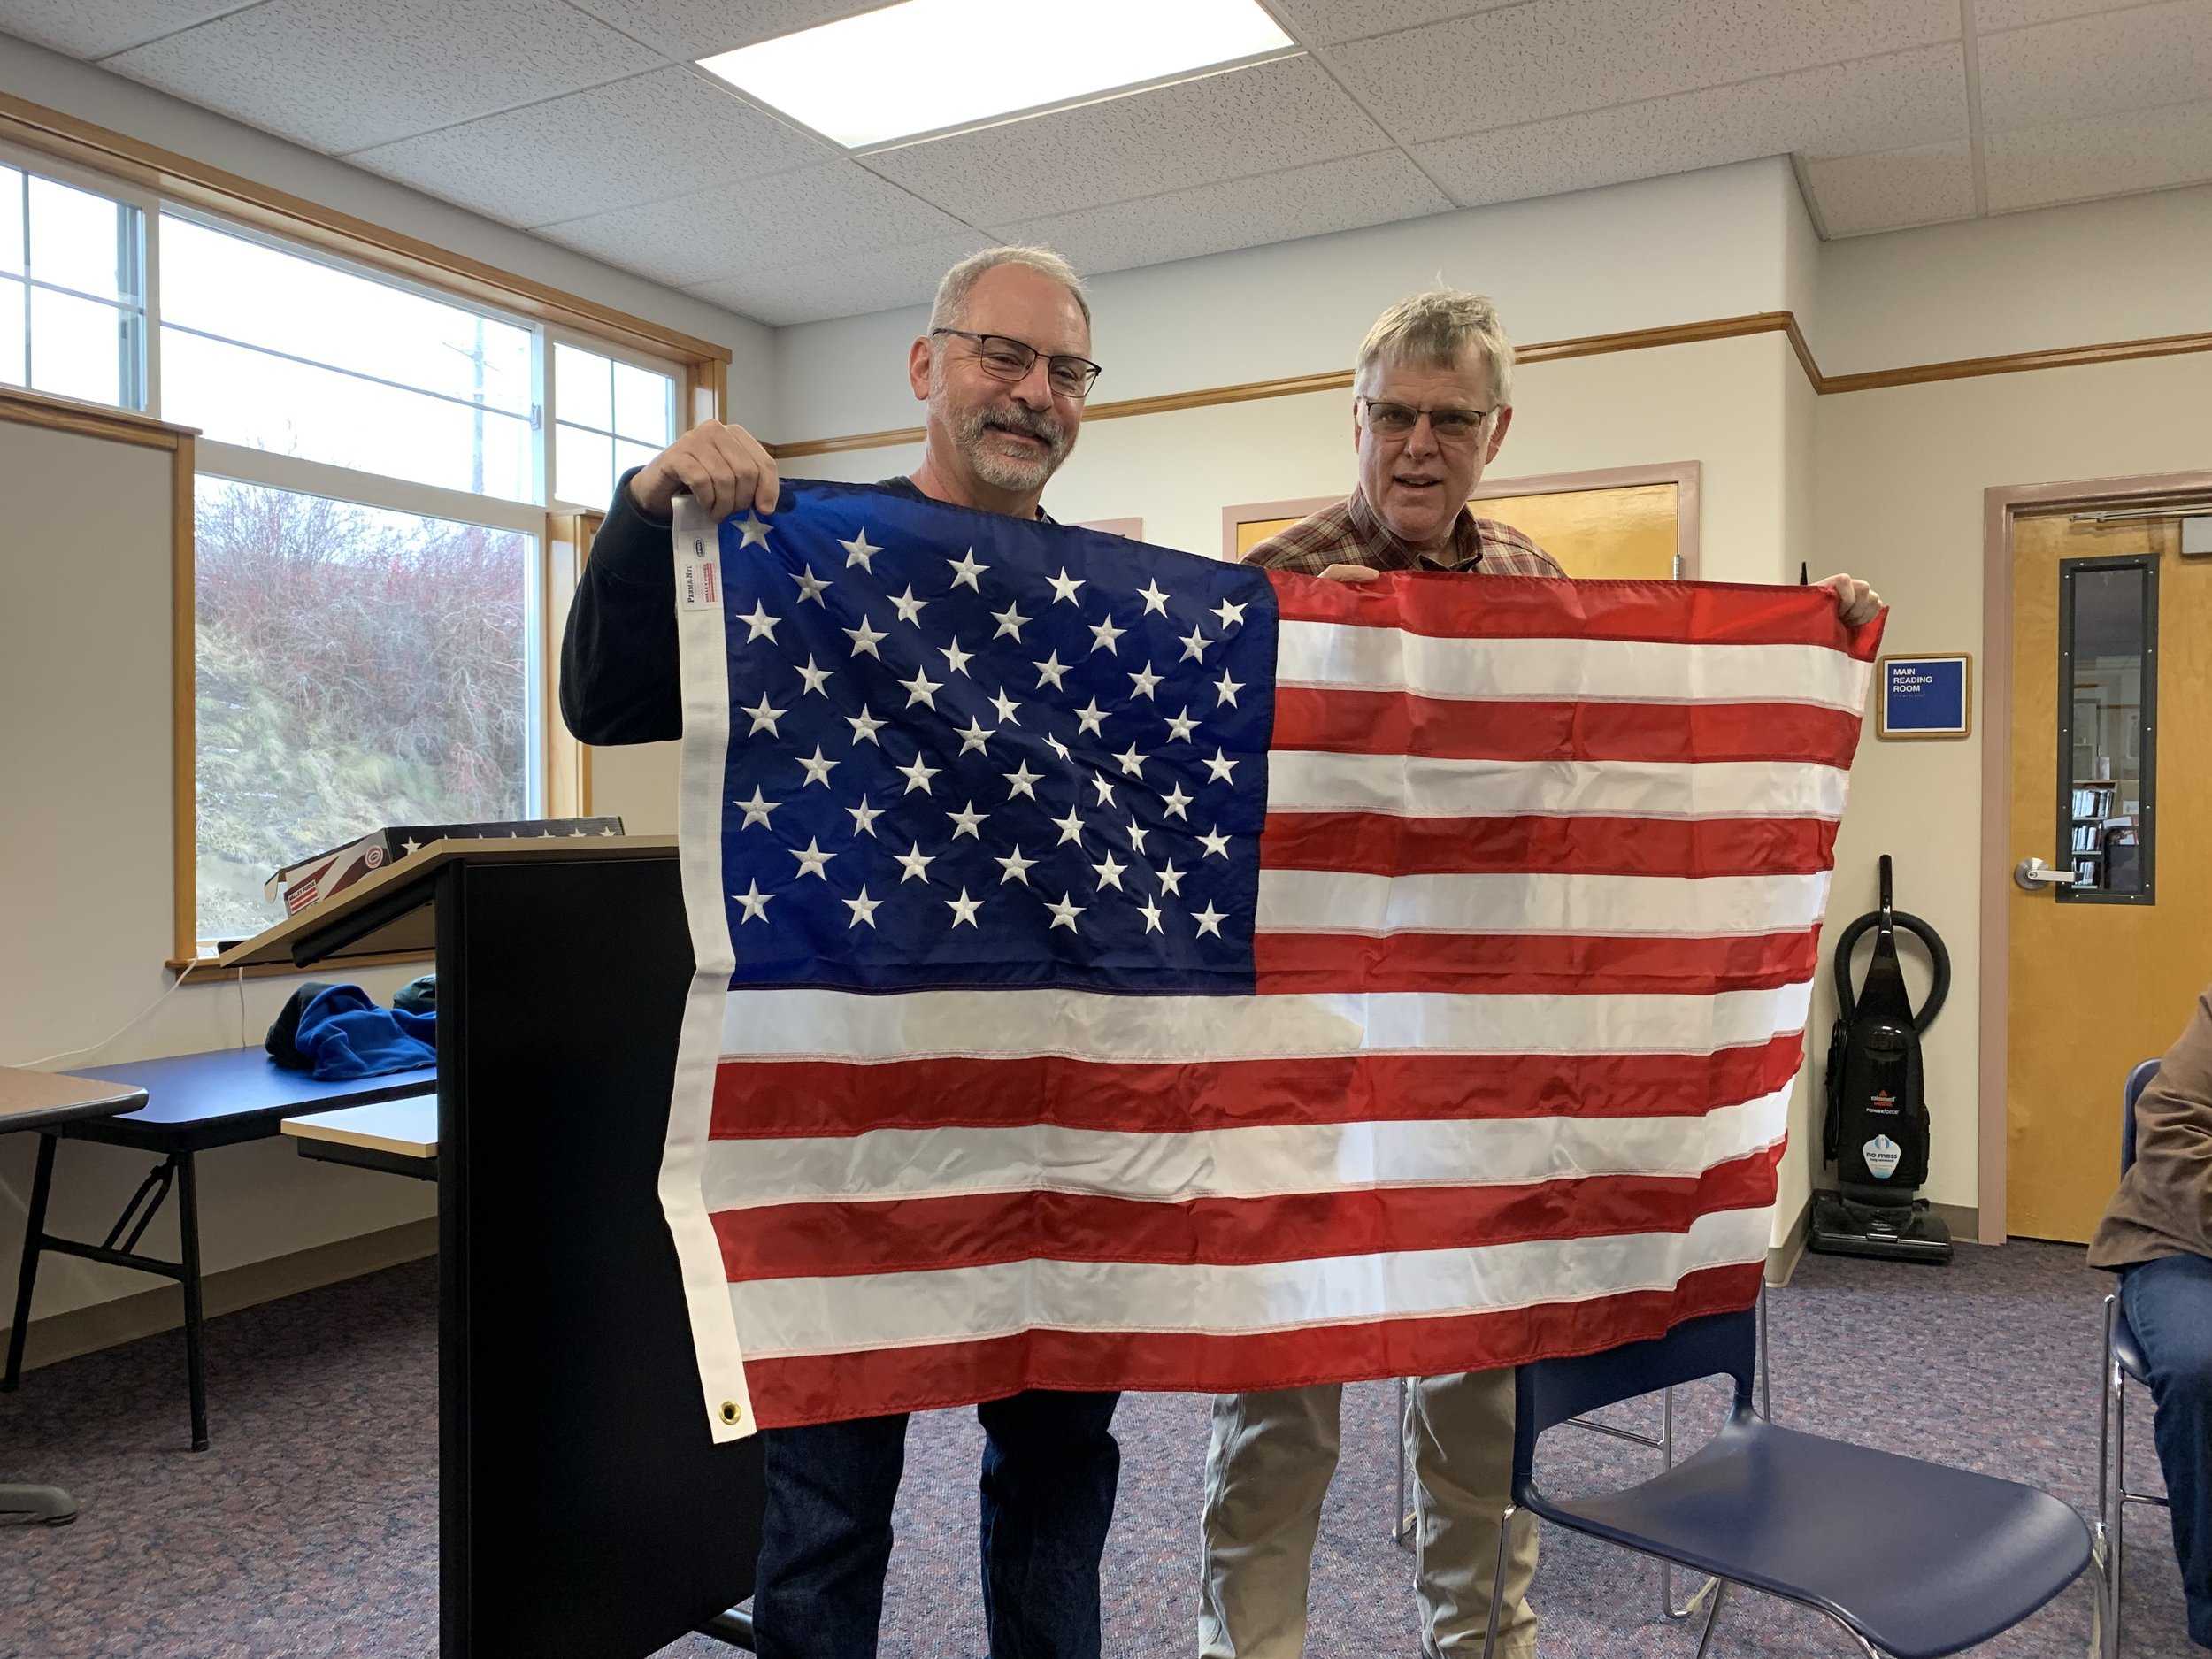 Potter and Nelson with flag in Potlatch.jpeg